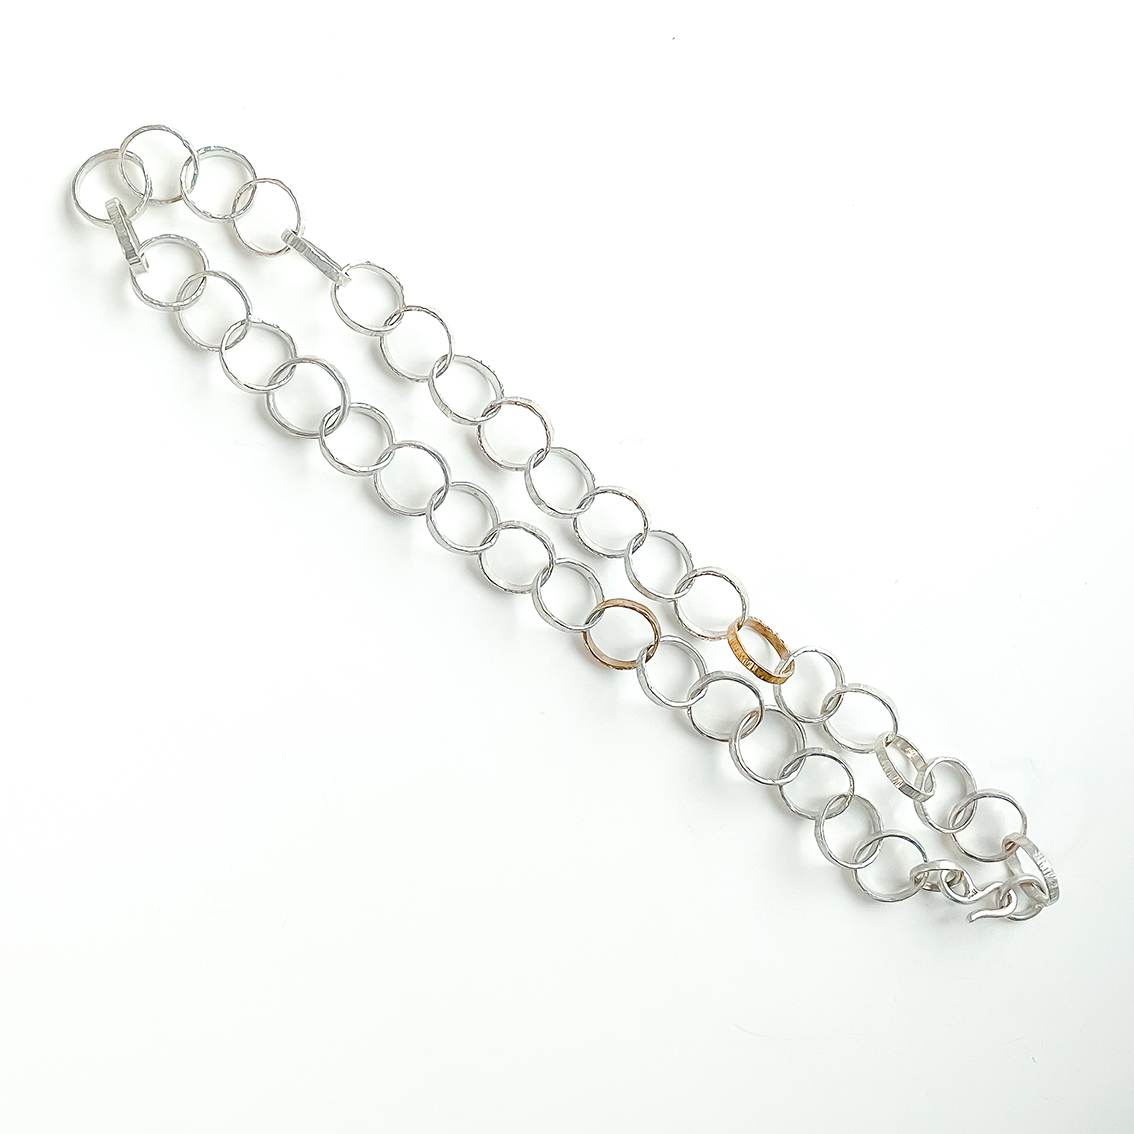 Heavy Textured Link Chain Necklace in Sterling Silver